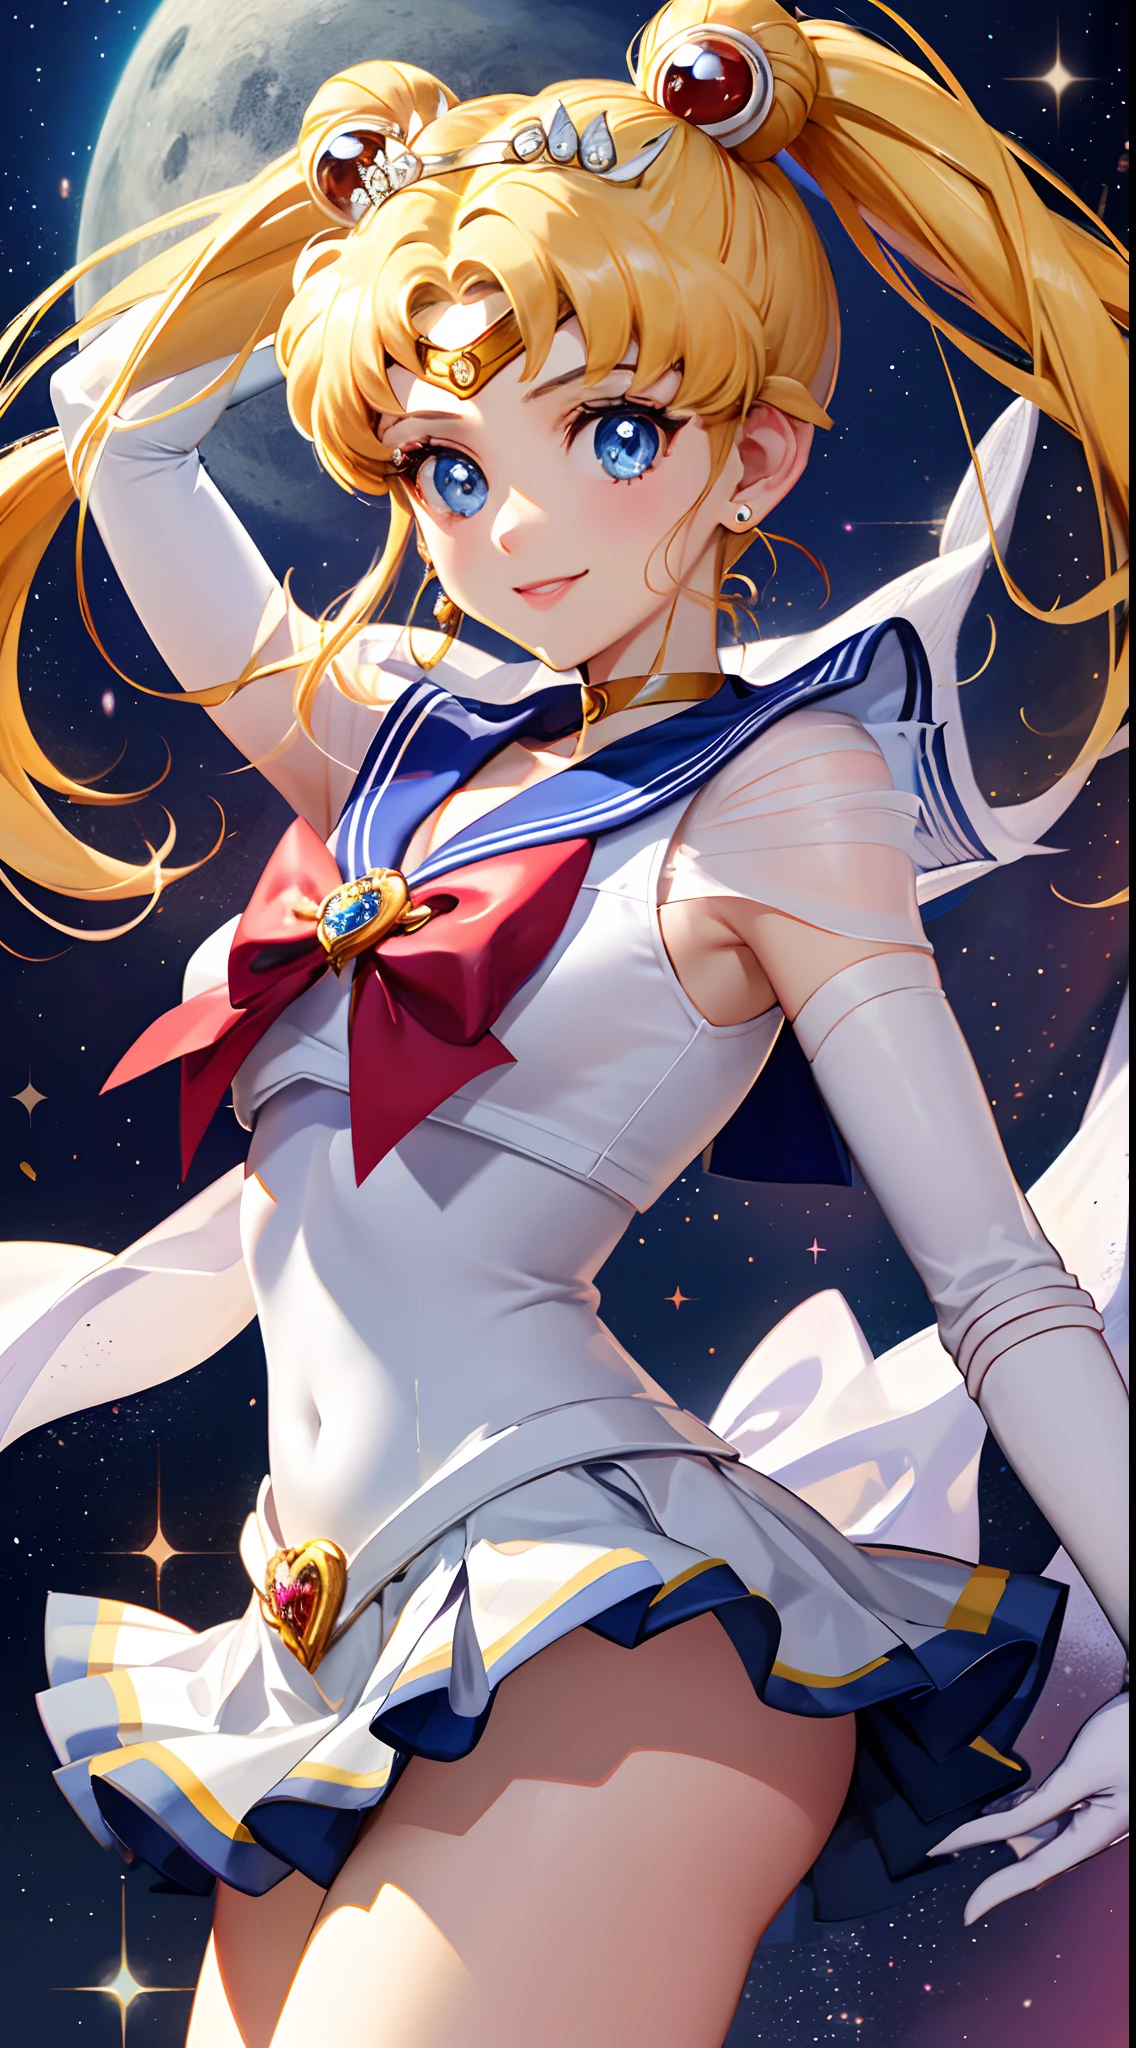 Masterpiece, Best Quality, Hi-Res, Moon 1, 1 Girl, Solo, Sailor Senshi Uniform, Sailor Moon, Usagi Tsukino, Blonde, Magical Girl, Blue Eyes, White Panties, Red Scarf, Elbow Gloves, Tiara, Blue Skirt, Pleated Skirt, Mini Skirt, Choker, White Gloves, Jewelry, Earrings, Smile, Background Is moon surface (Excellent Detail, Excellent Lighting, Wide Angle), skirt lift, show panties,